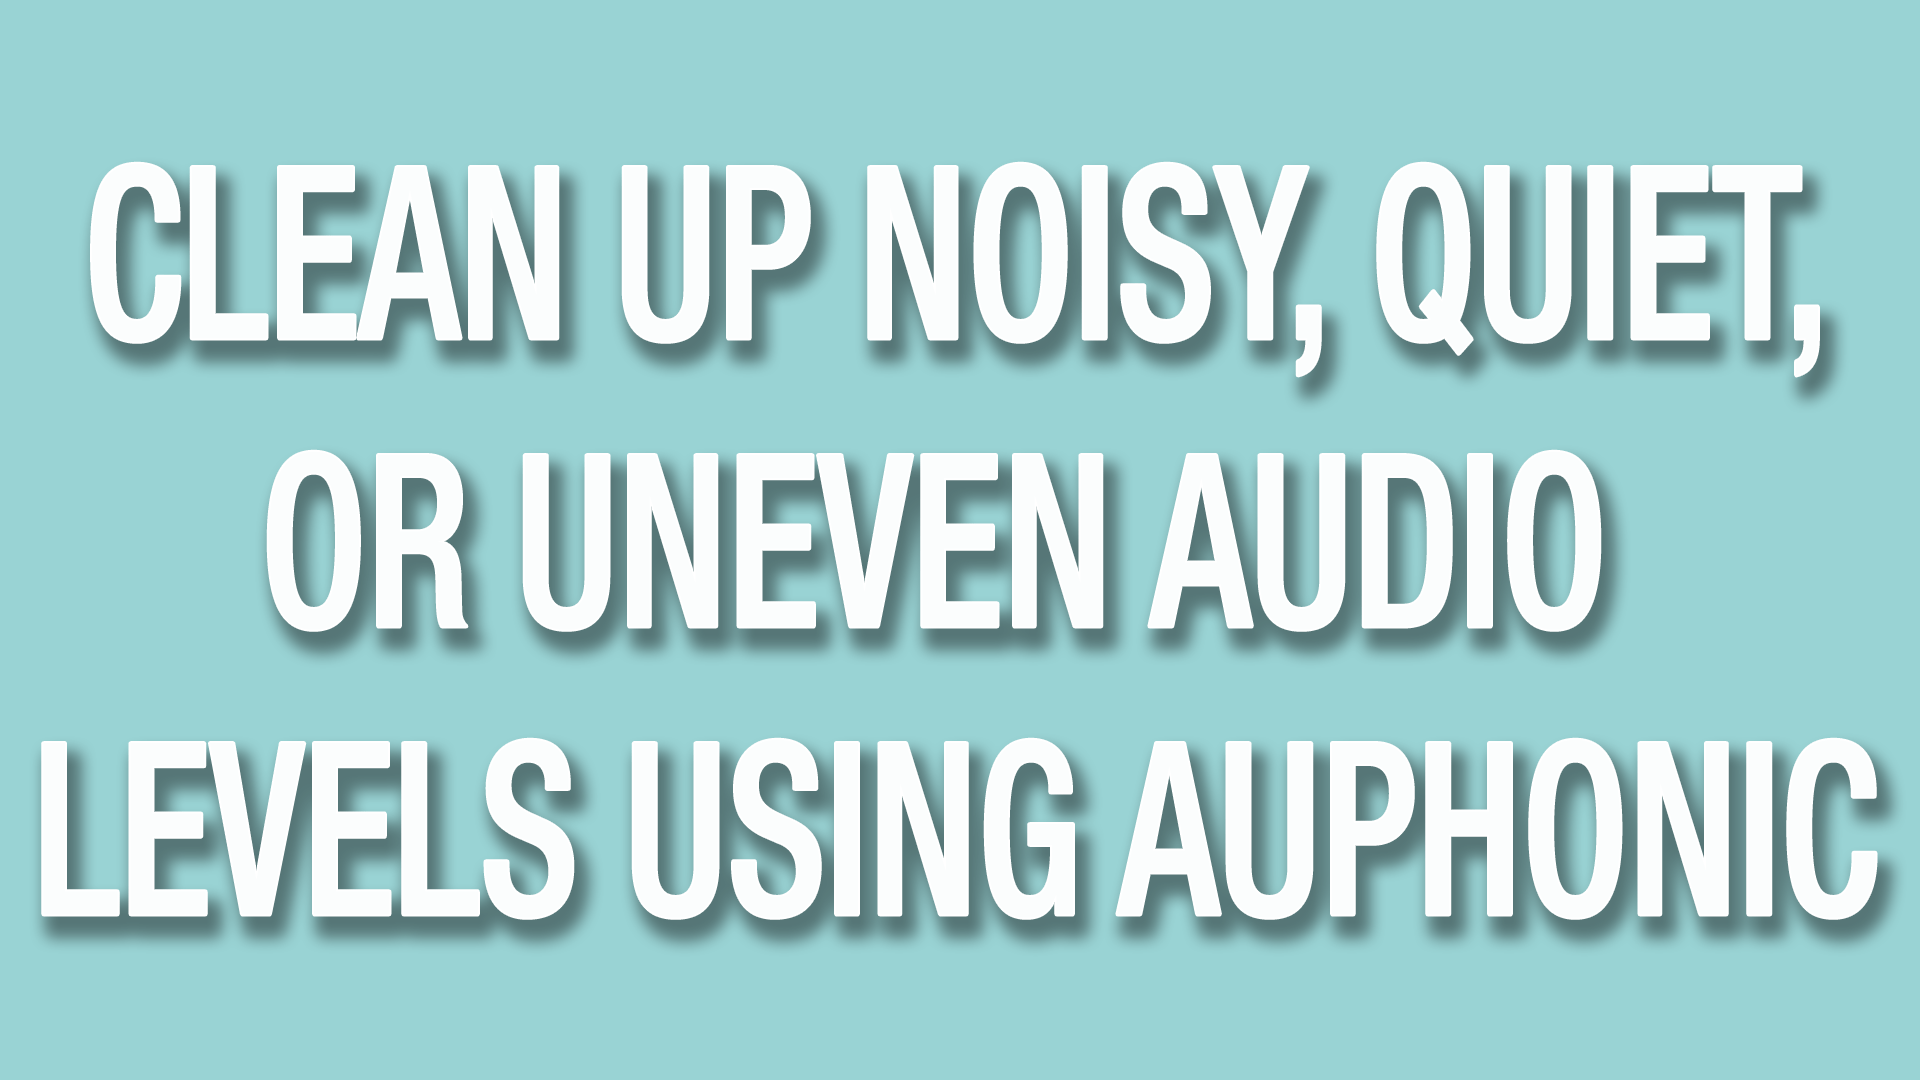 Clean up noisy, quiet, or uneven audio levels using Auphonic